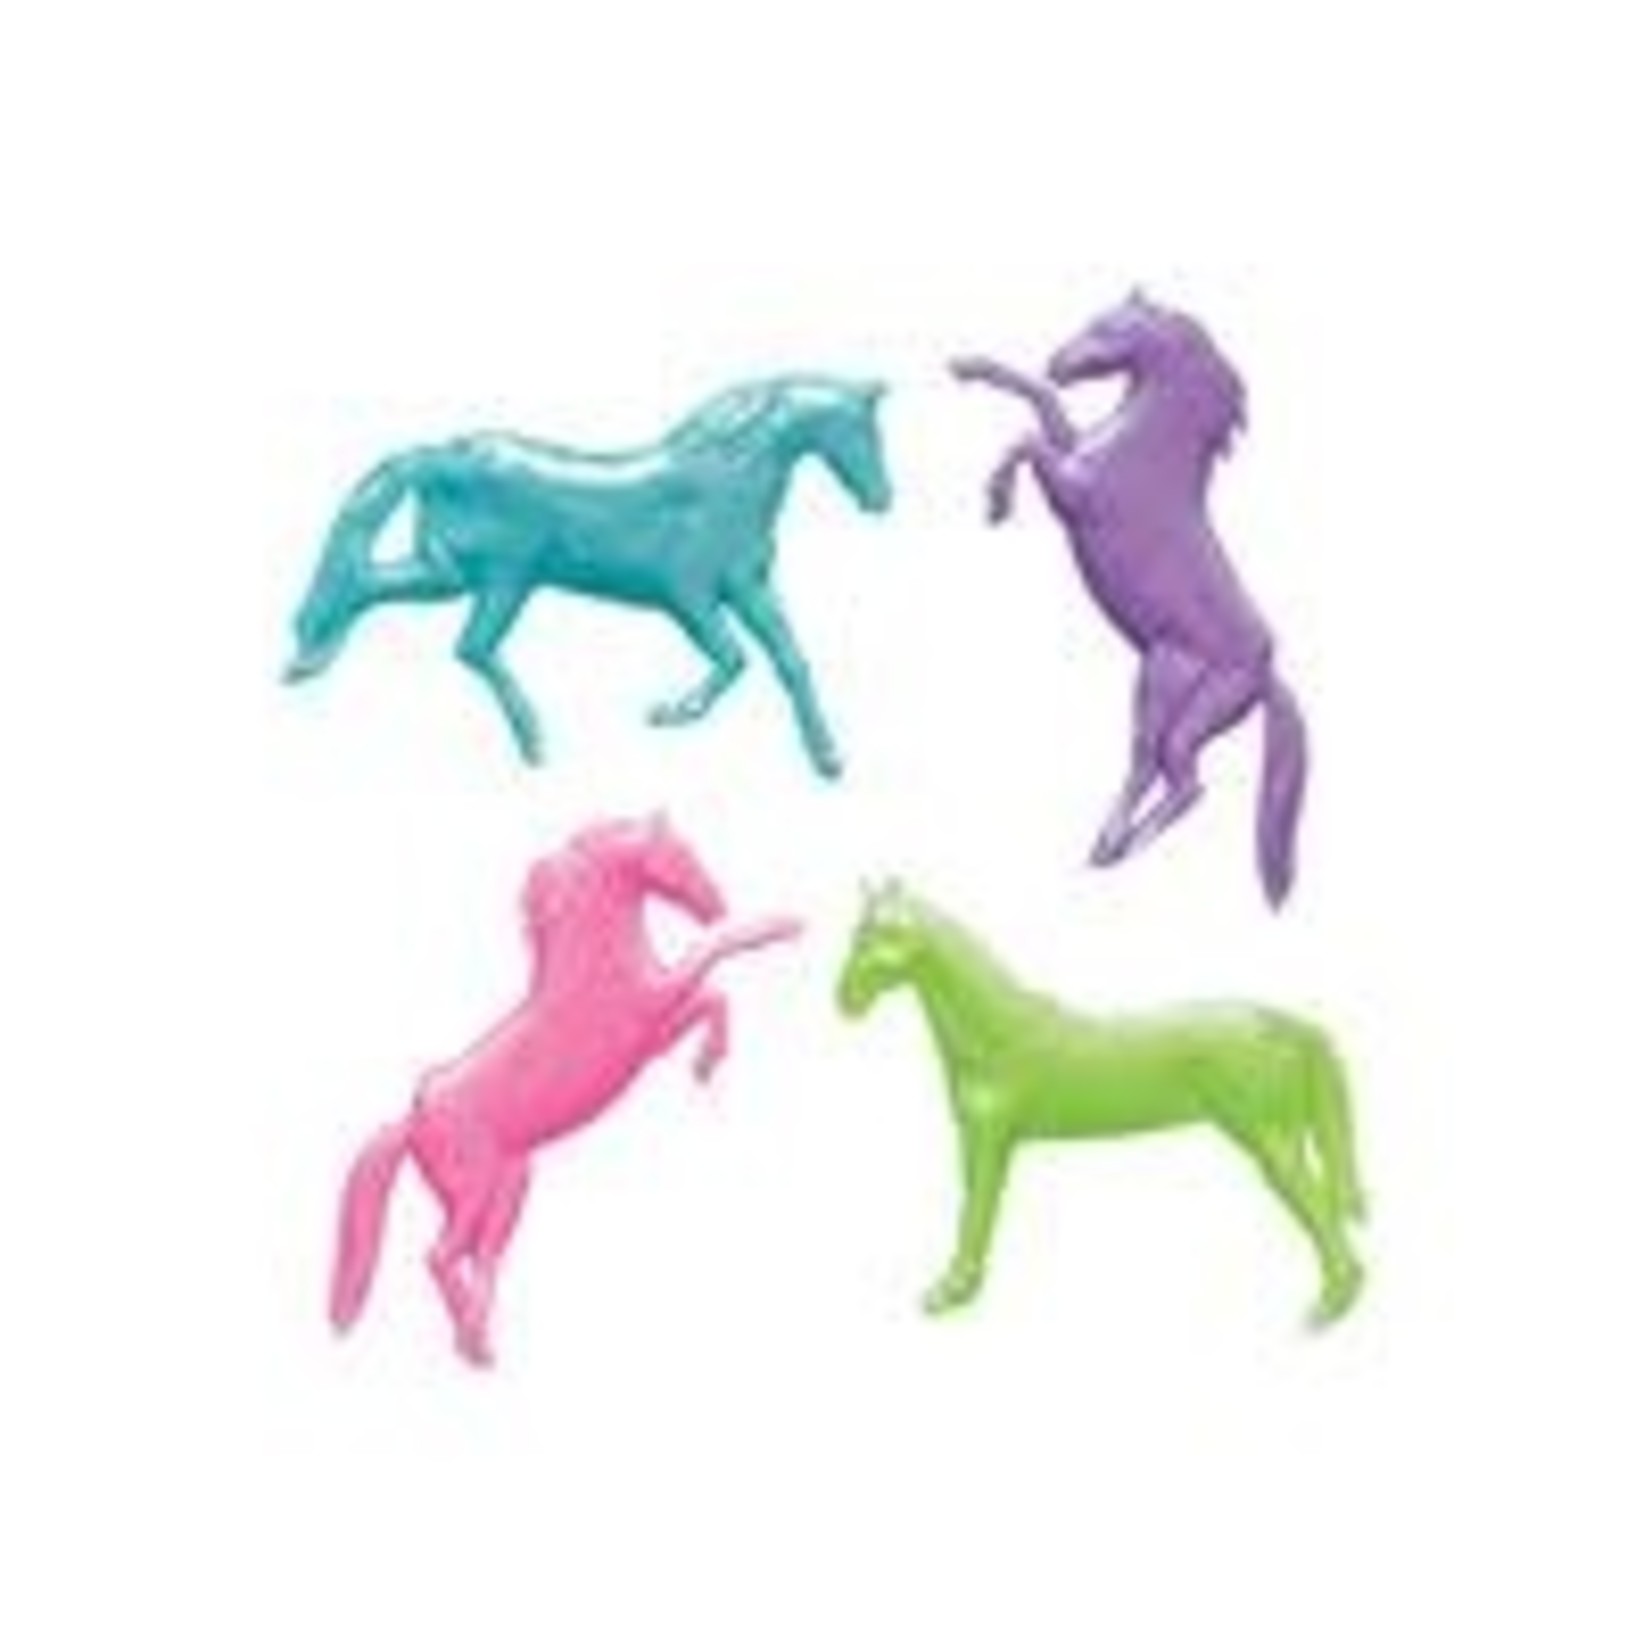 Toy Pearlized Stretchy Horses 8ct